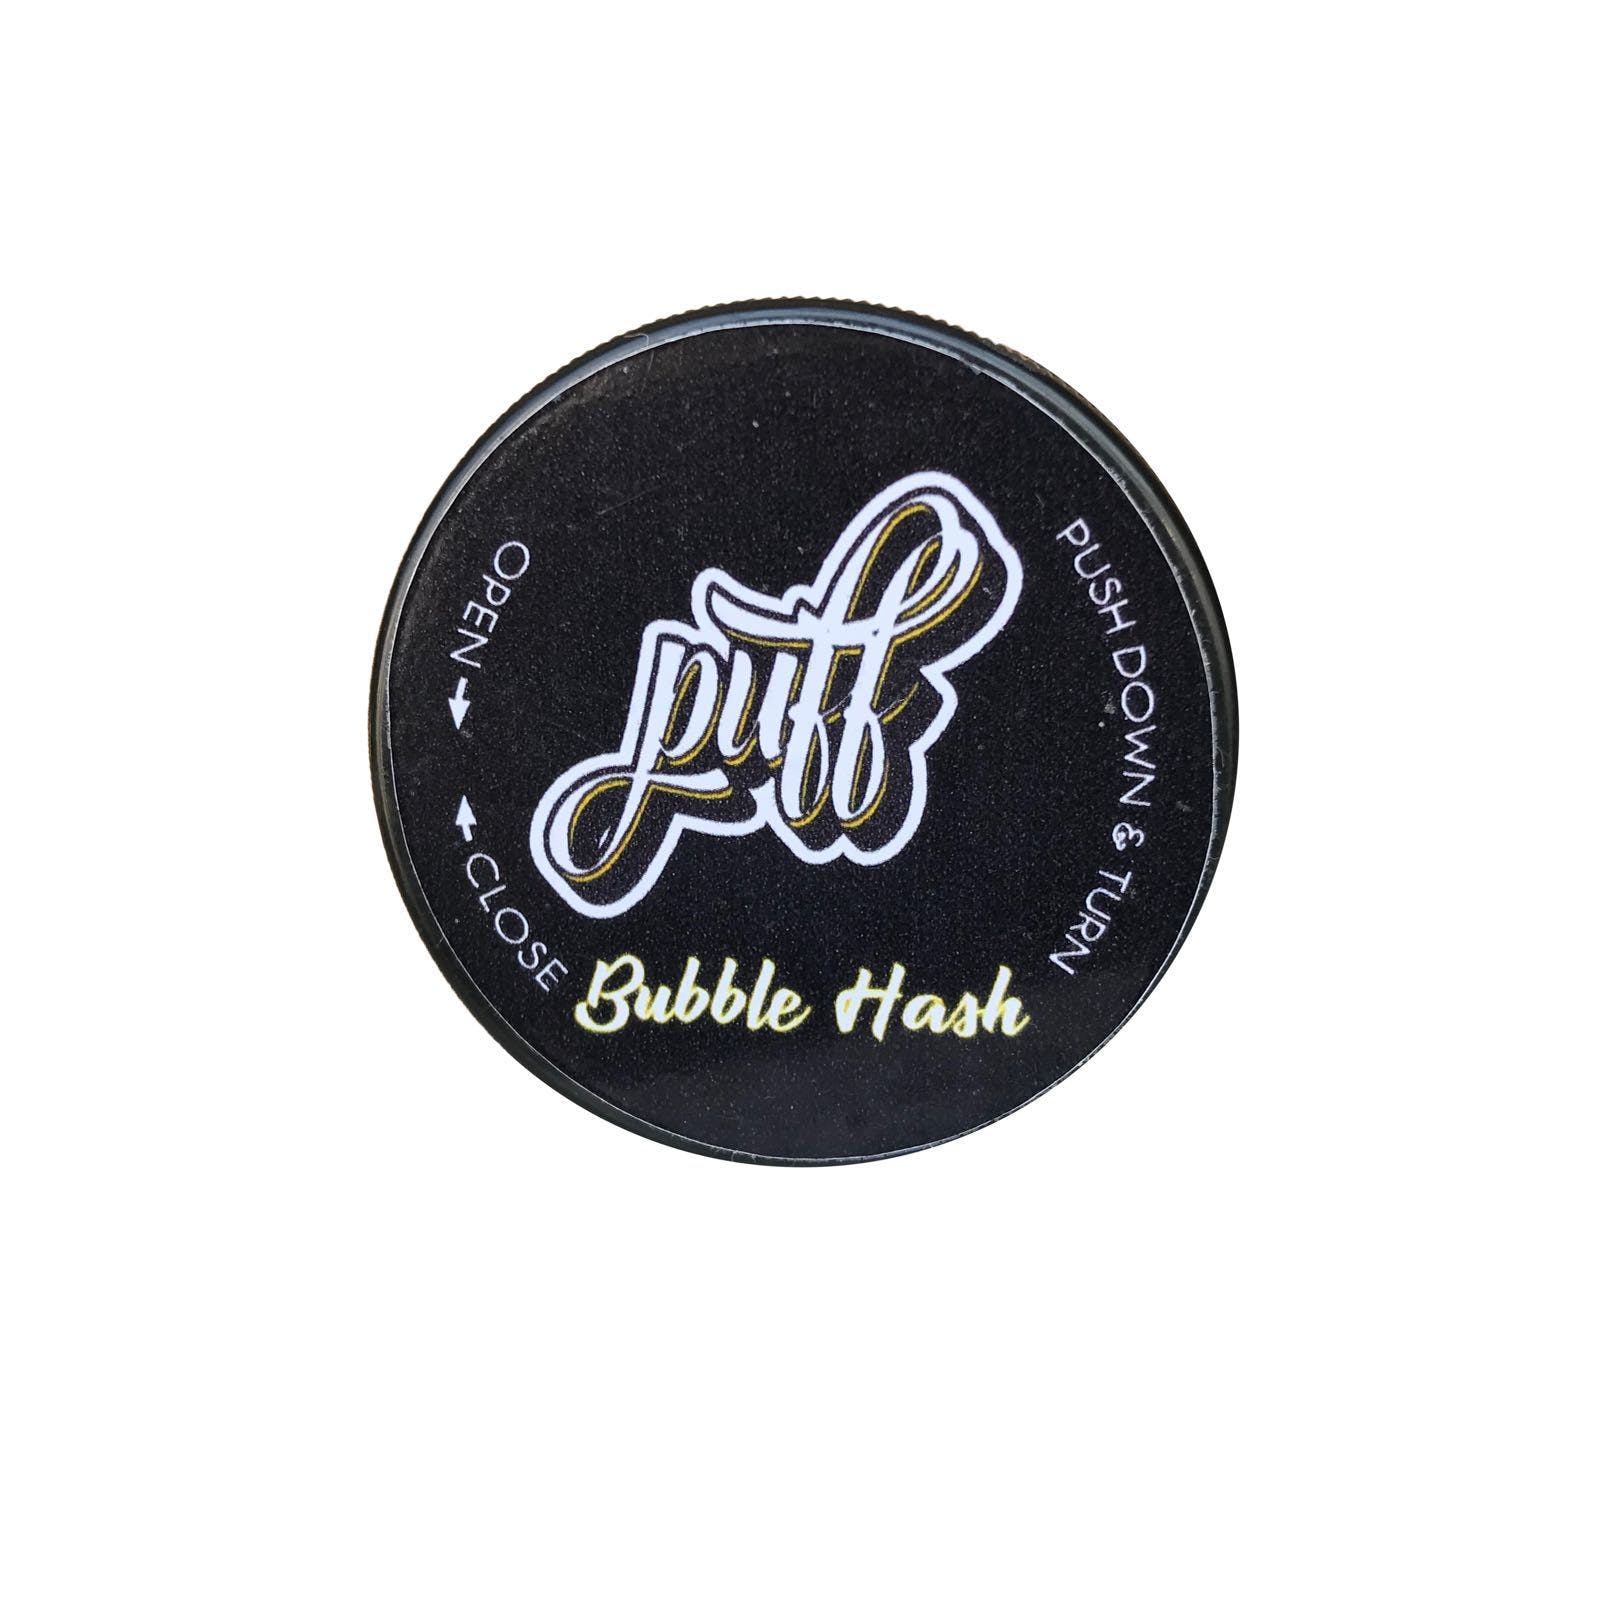 Puff Bubble Hash (5 for 100)